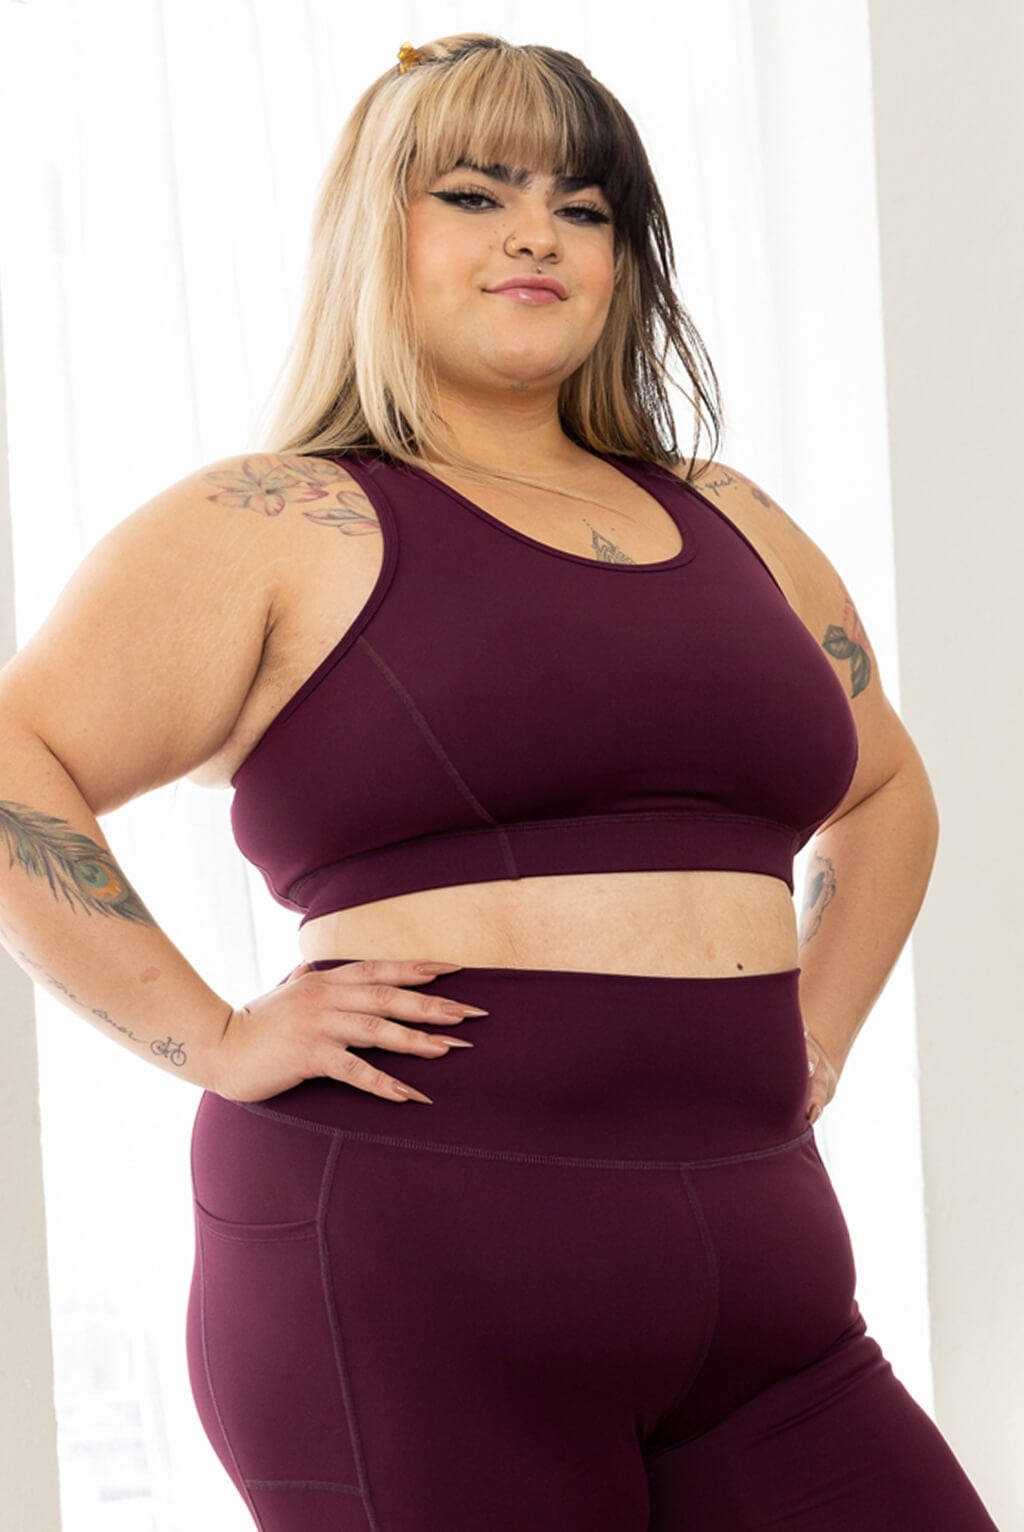 12 Pieces of Plus Size Activewear to Up Your Exercise Game - The Breast Life